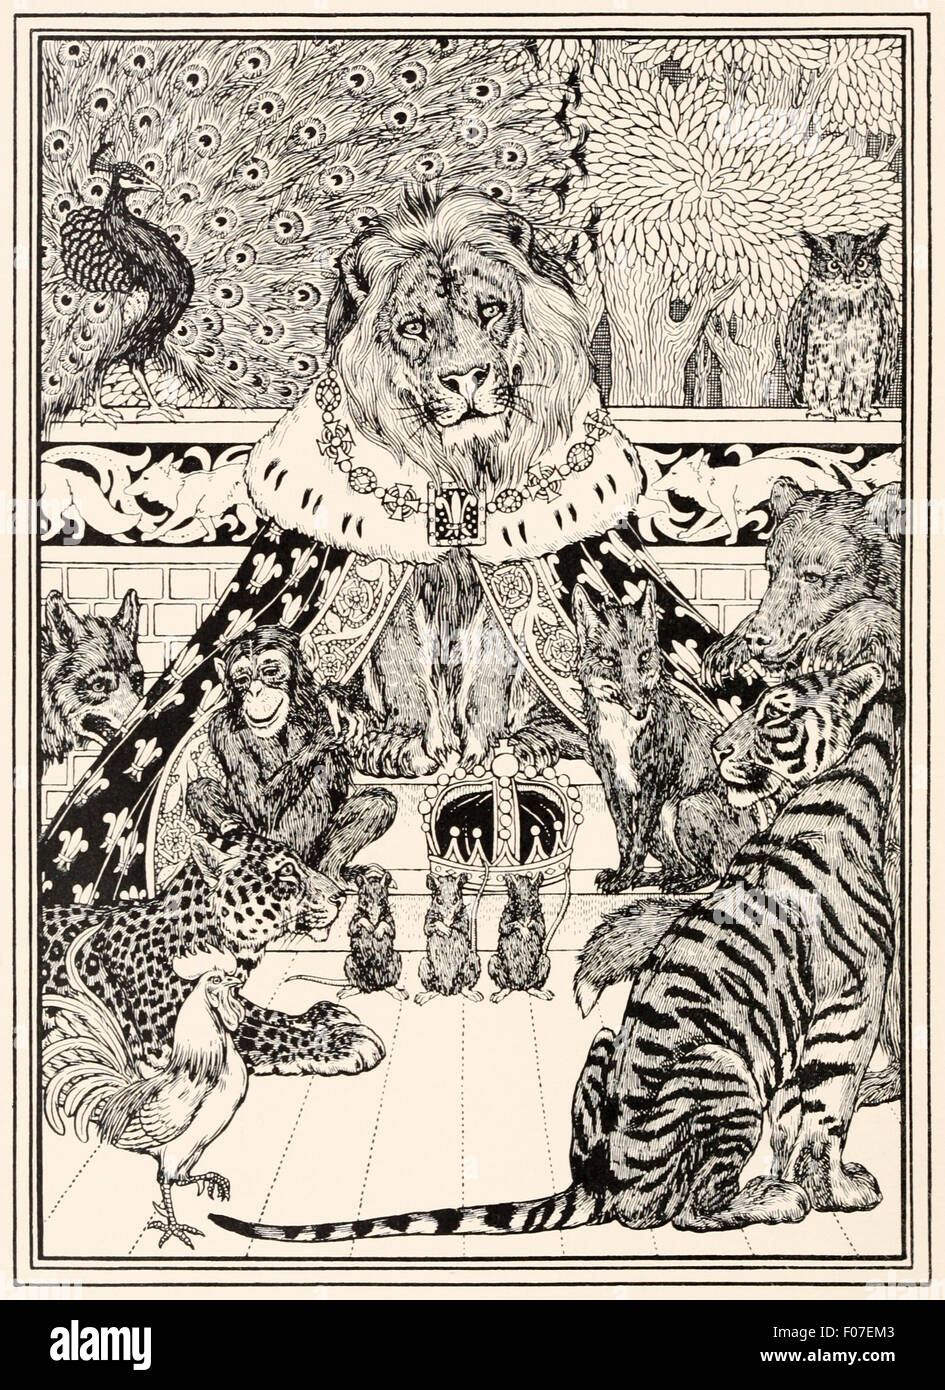 Frontispiece from ‘A Hundred Fables of La Fontaine’ a collection of Aesop's fables dating from circa 600BC. Illustration by Percy J. Billinghurst. See description for more information. Stock Photo